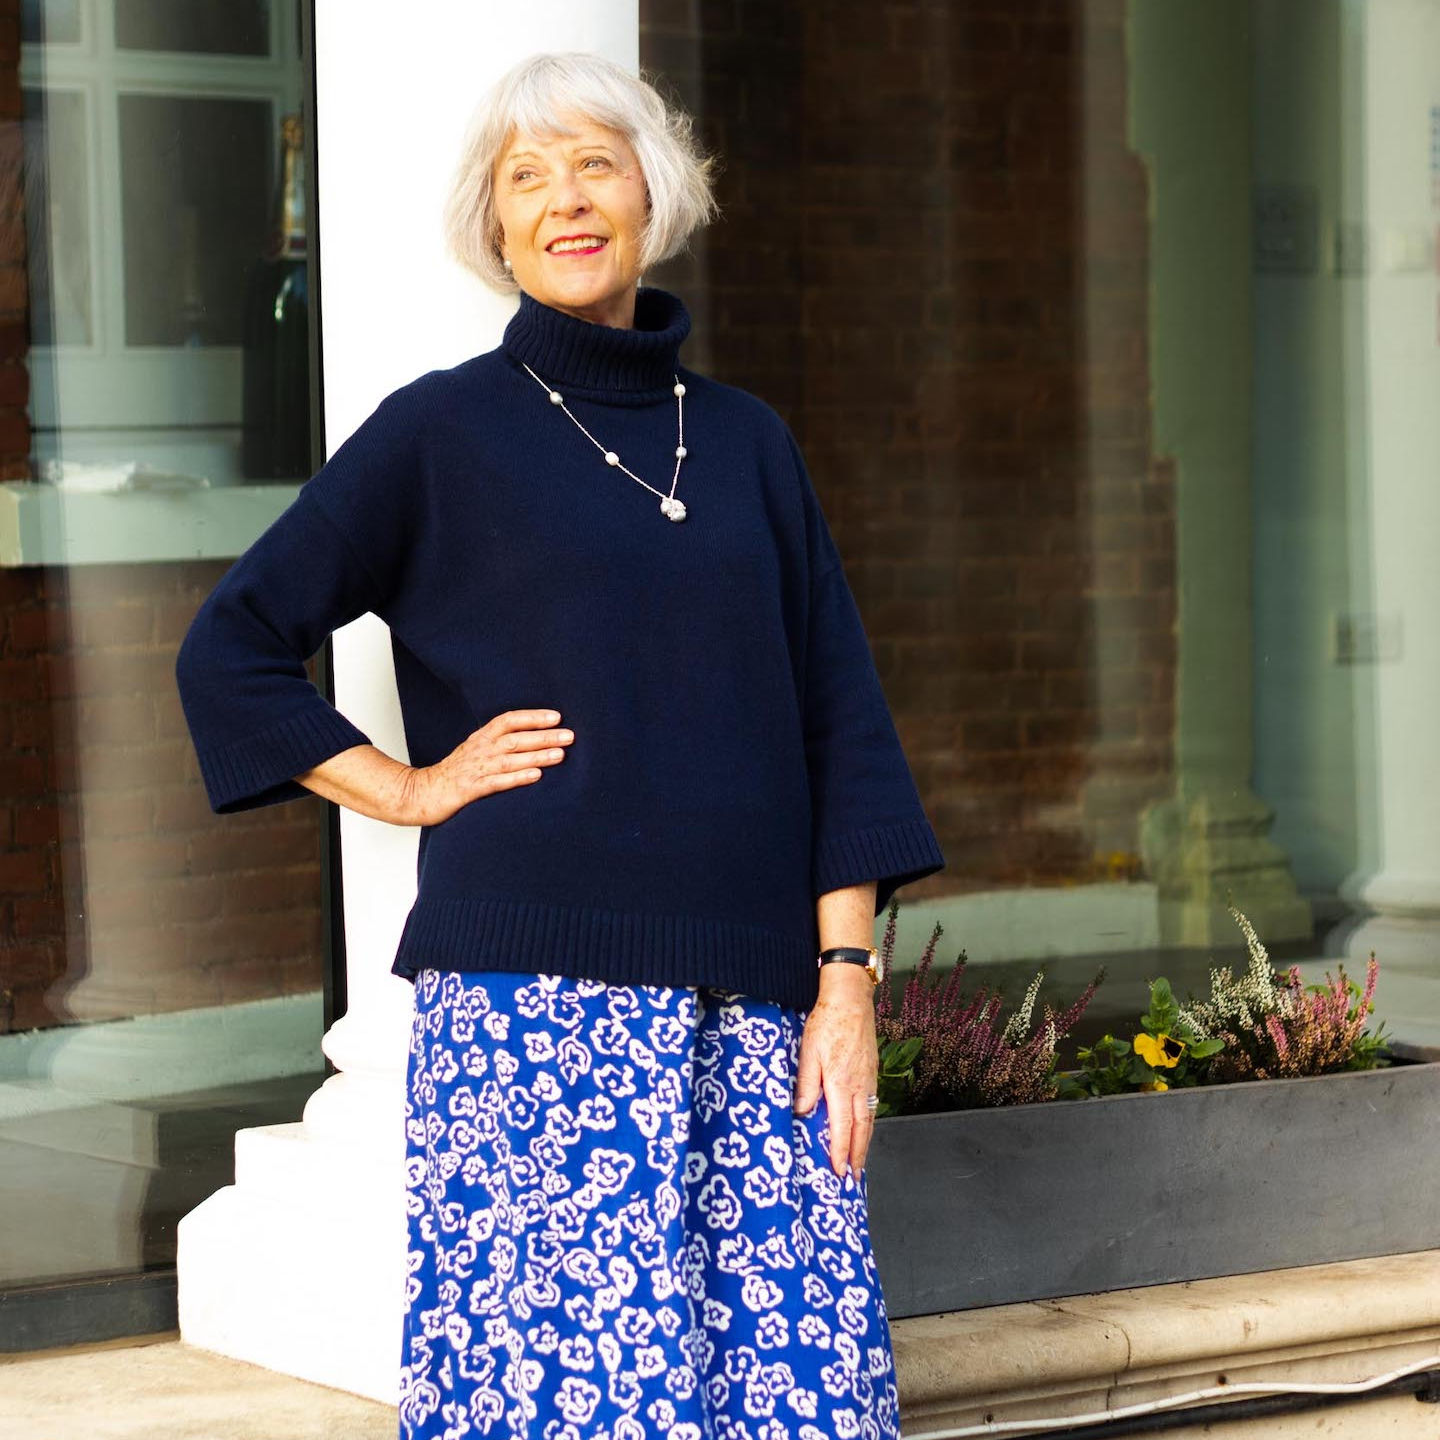 How to adapt a summer skirt for winter - Chic at any age